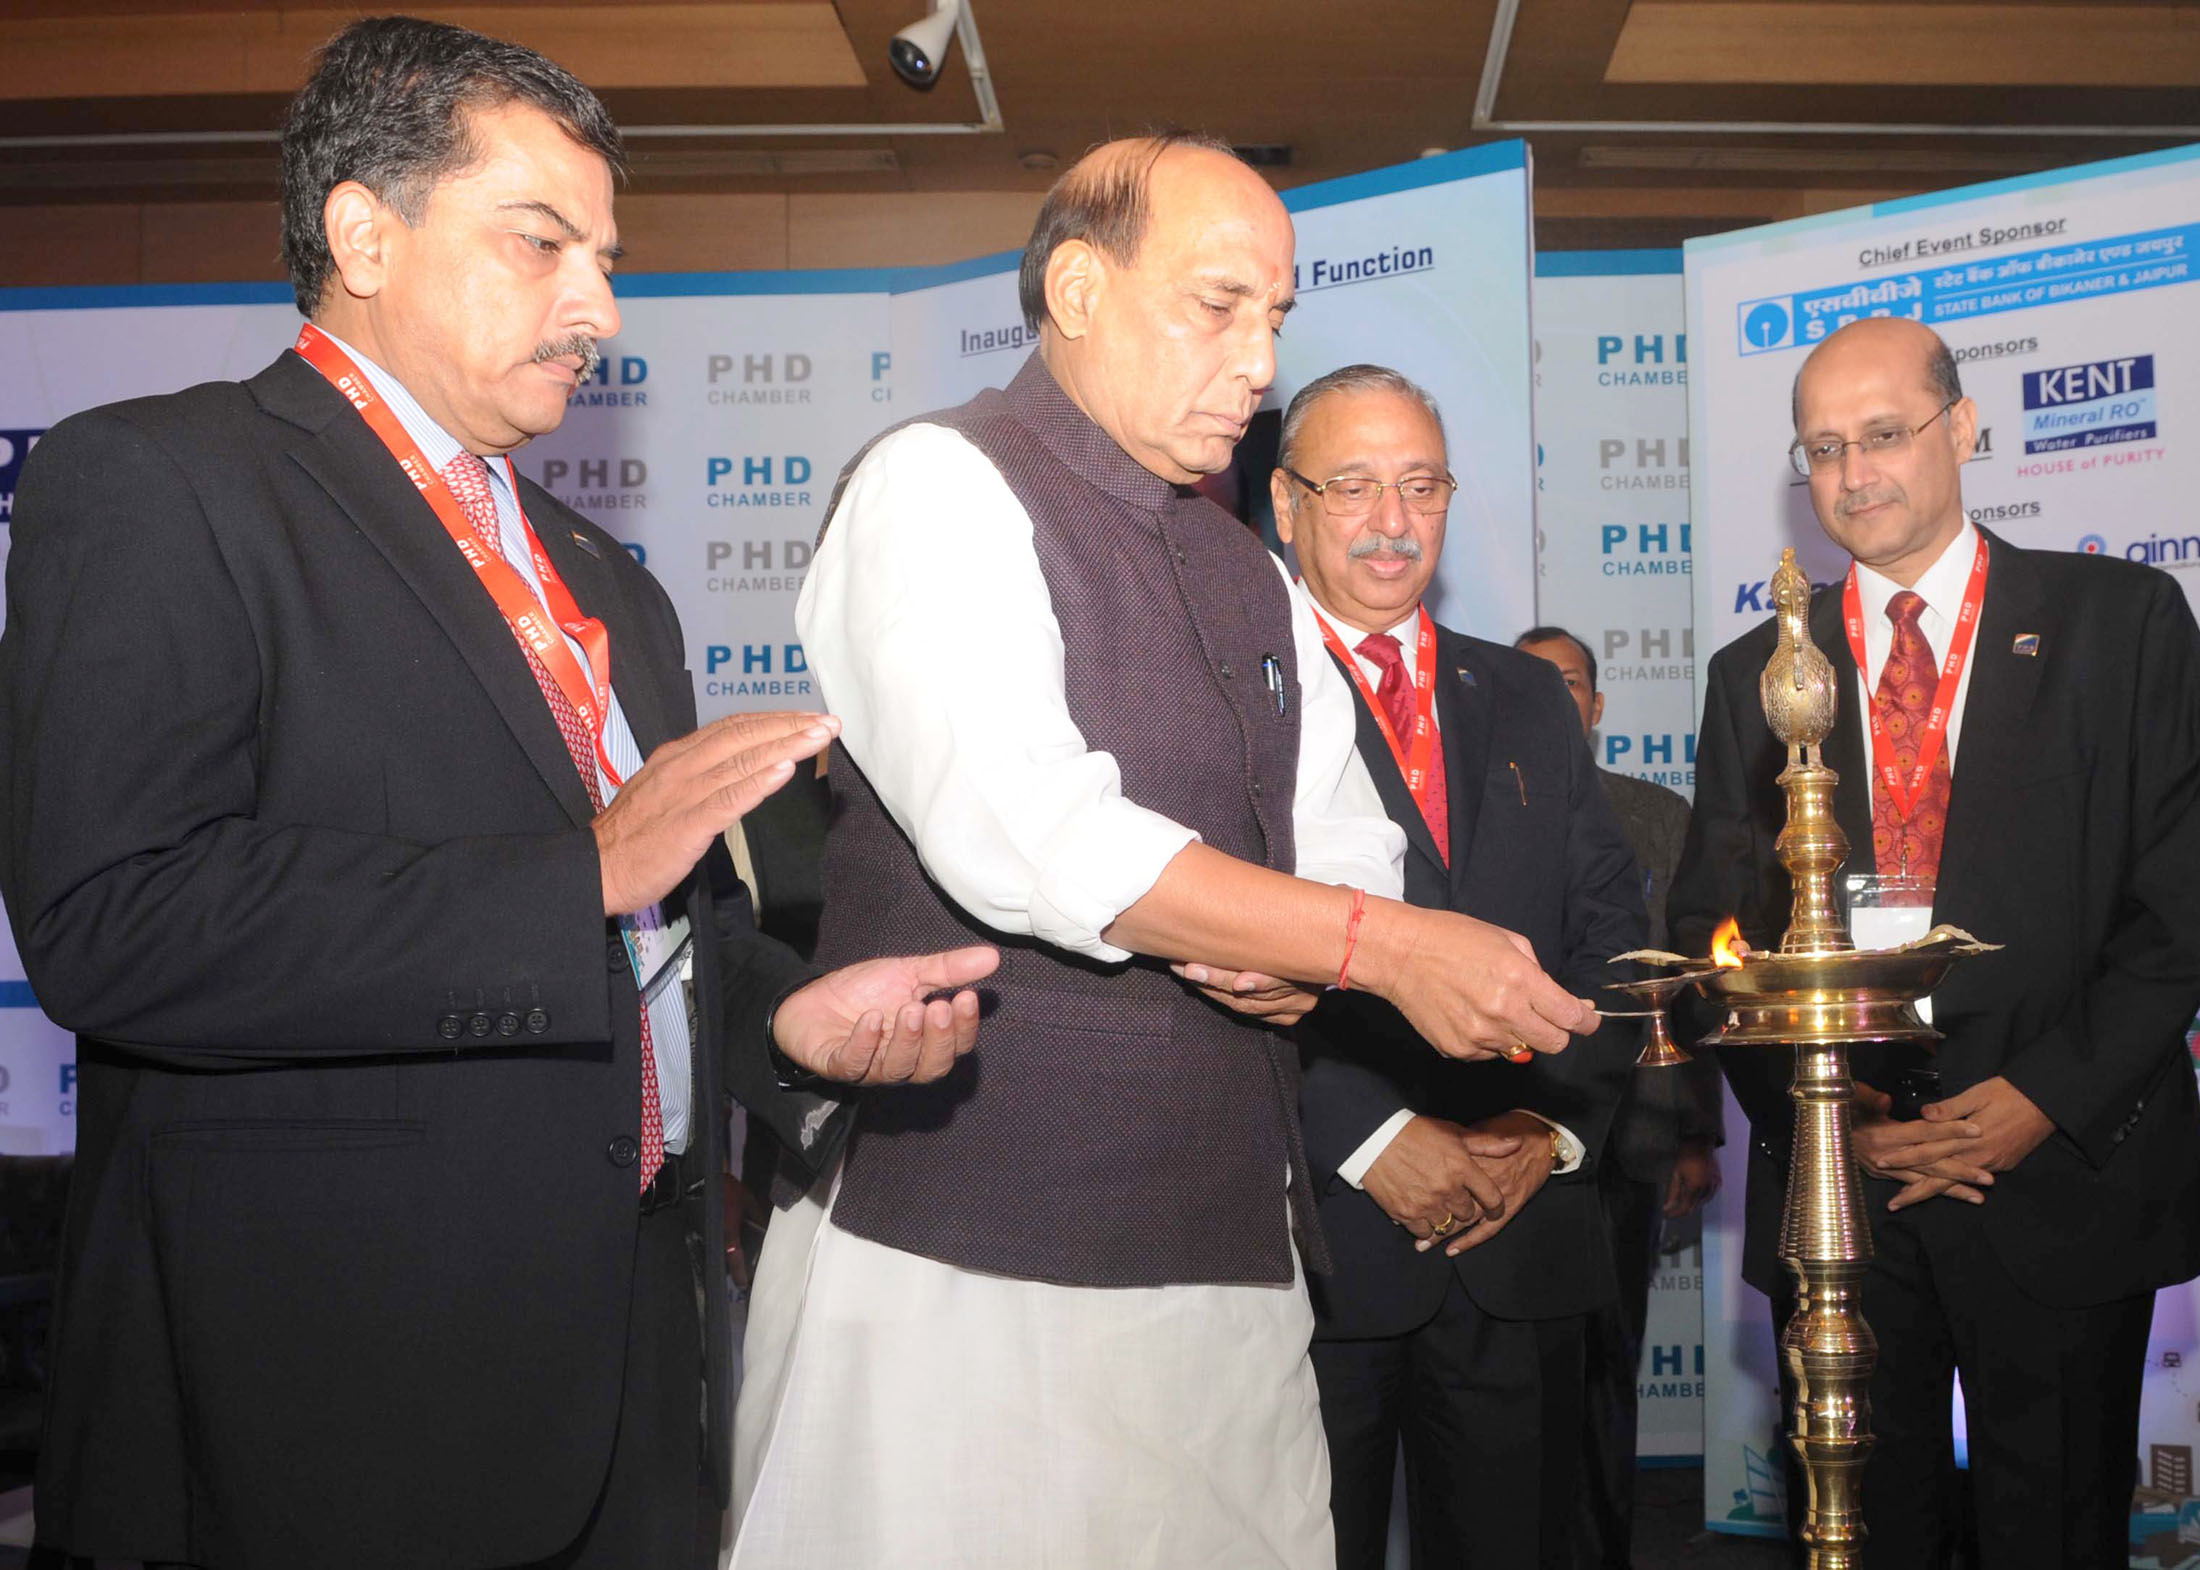 The Union Home Minister, Shri Rajnath Singh lighting the lamp to inaugurate the 110th Annual Session of the PHD Chamber and PHD Annual Awards for Excellence  2015 function, in New Delhi on November 28, 2015.